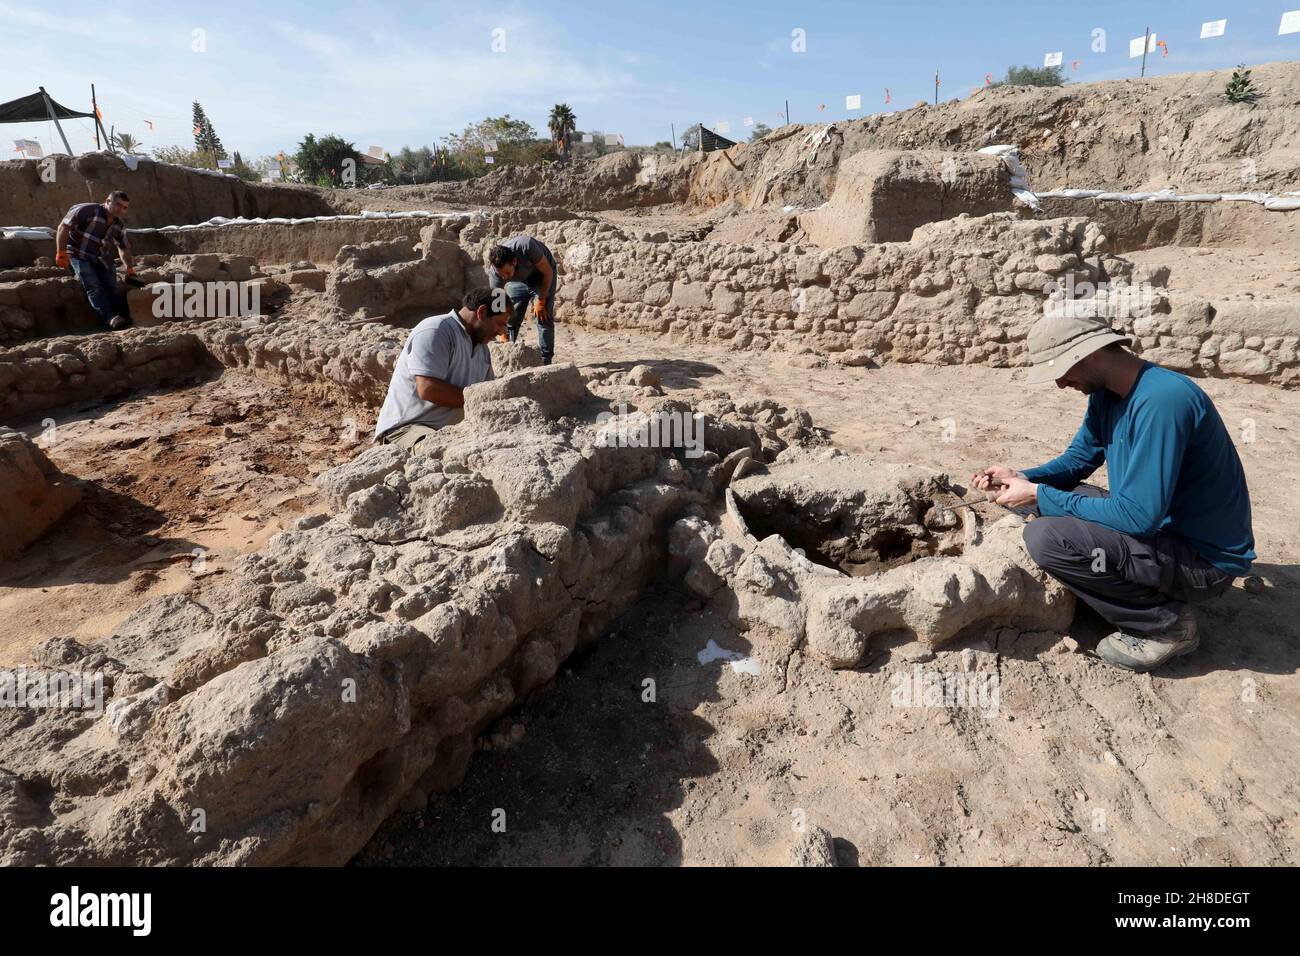 Yavne. 29th Nov, 2021. Staff members of Israel Antiquities Authority (IAA) work at an excavation site in central Israeli city of Yavne on Nov. 29, 2021. Israeli archaeologists have discovered remains of an industrial building and a nearby wide cemetery, both dating back to about 1,900 years ago, the Israel Antiquities Authority (IAA) said Monday. This is the first building discovered in the ancient central city of Yavne from the time of the Sanhedrin, which was the supreme legislative Jewish assembly. Credit: Gil Cohen Magen/Xinhua/Alamy Live News Stock Photo